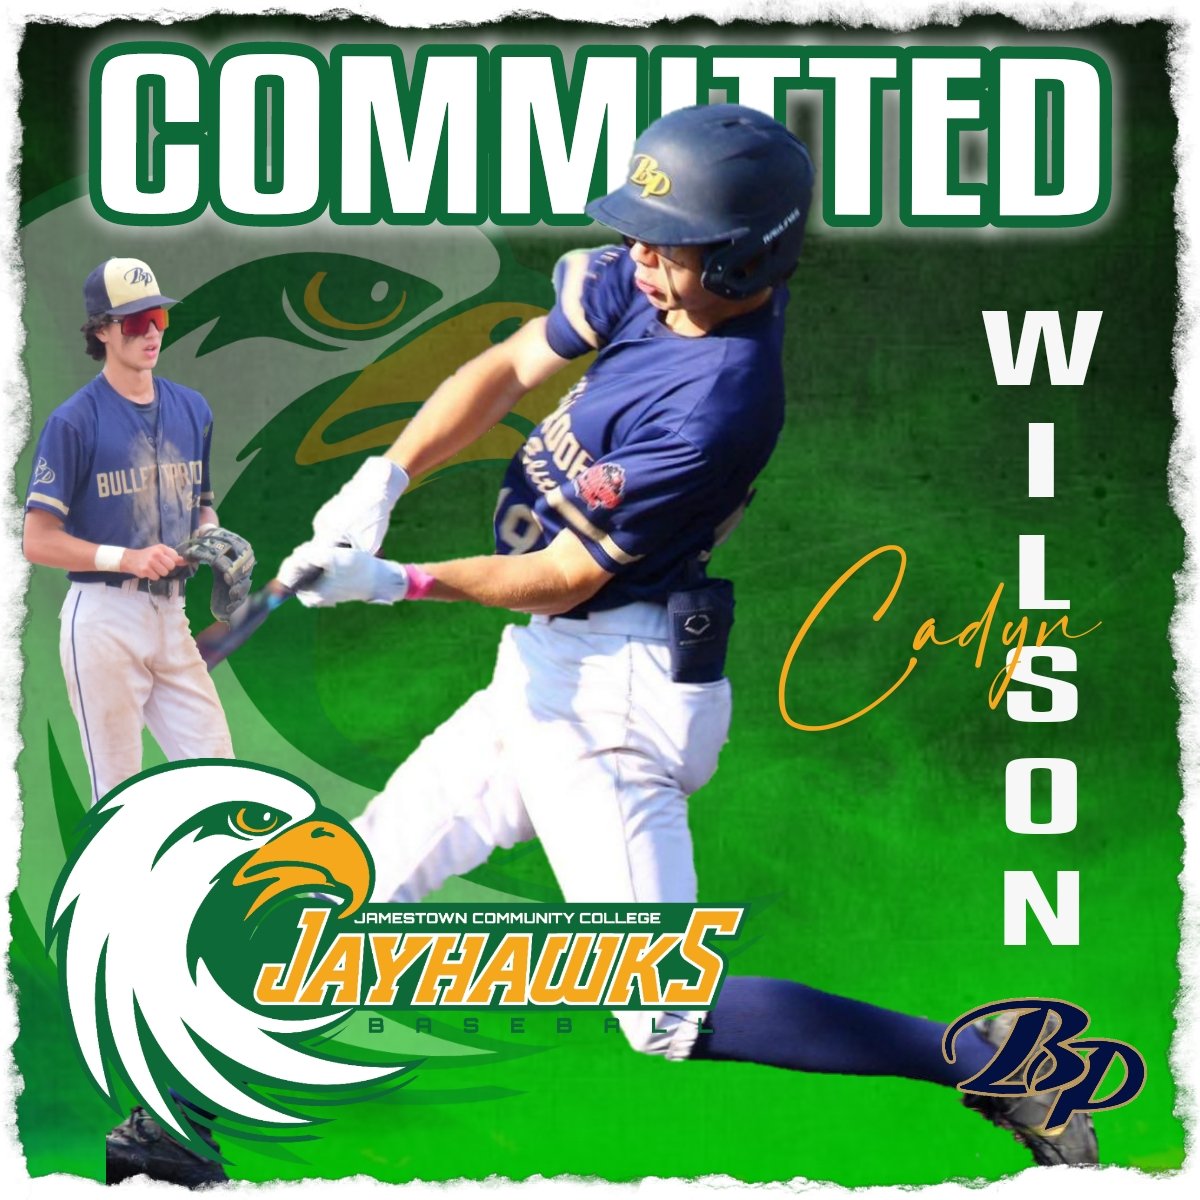 Congratulations to BP Elite's INF @cadynwilson2 on his commitment to continue his athletic and academic aspirations at Jamestown Community College NJCAA D3 in Jamestown NY. Great addition to @JCCJayhawksBase #rollhawks